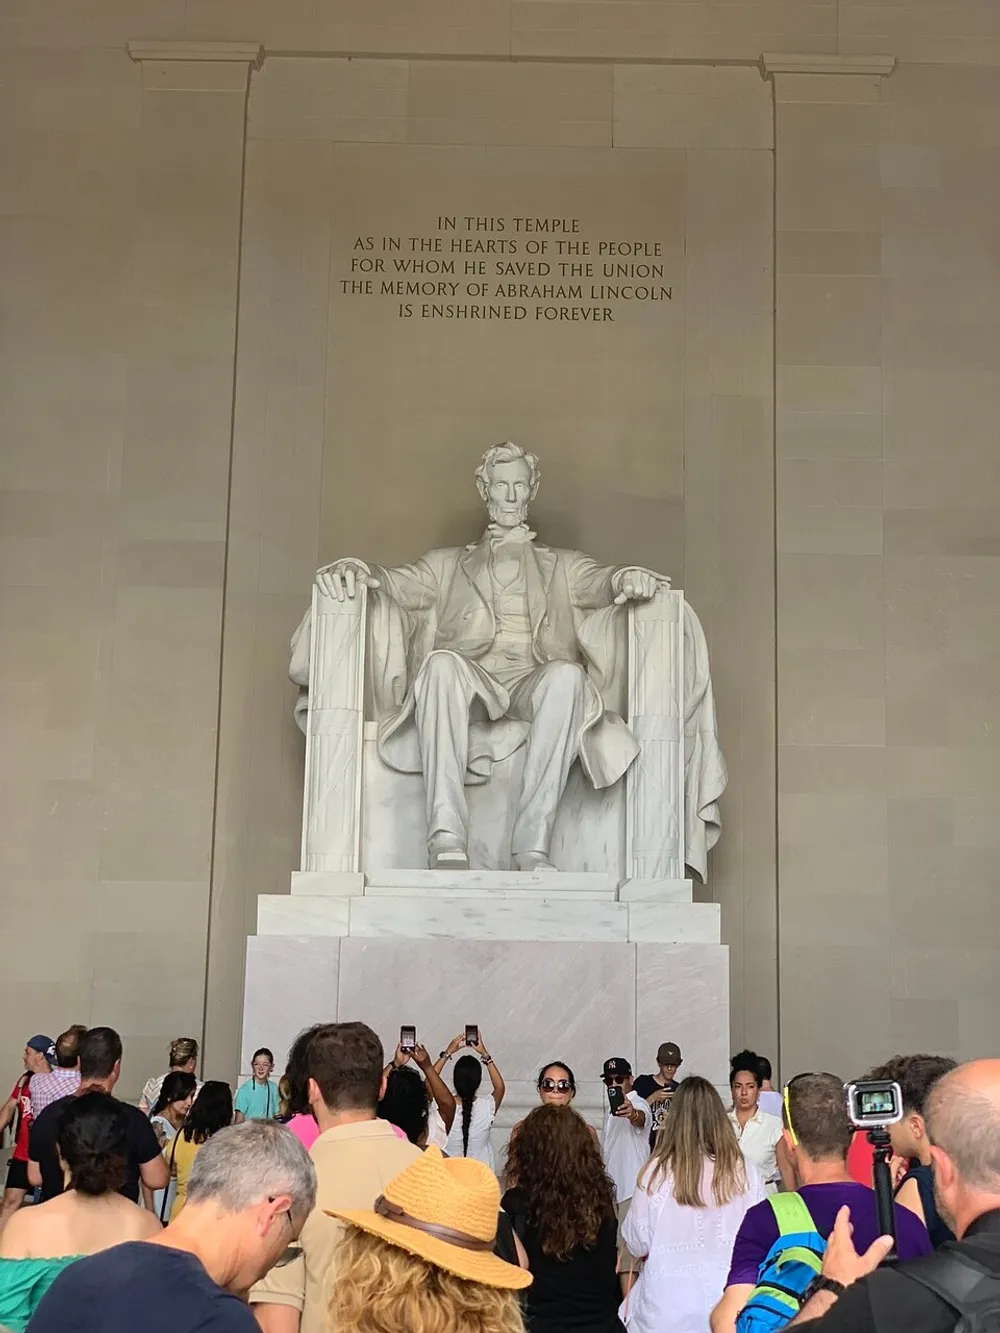 Visitors are gathered to view and take photos of the iconic statue of Abraham Lincoln at the Lincoln Memorial in Washington DC